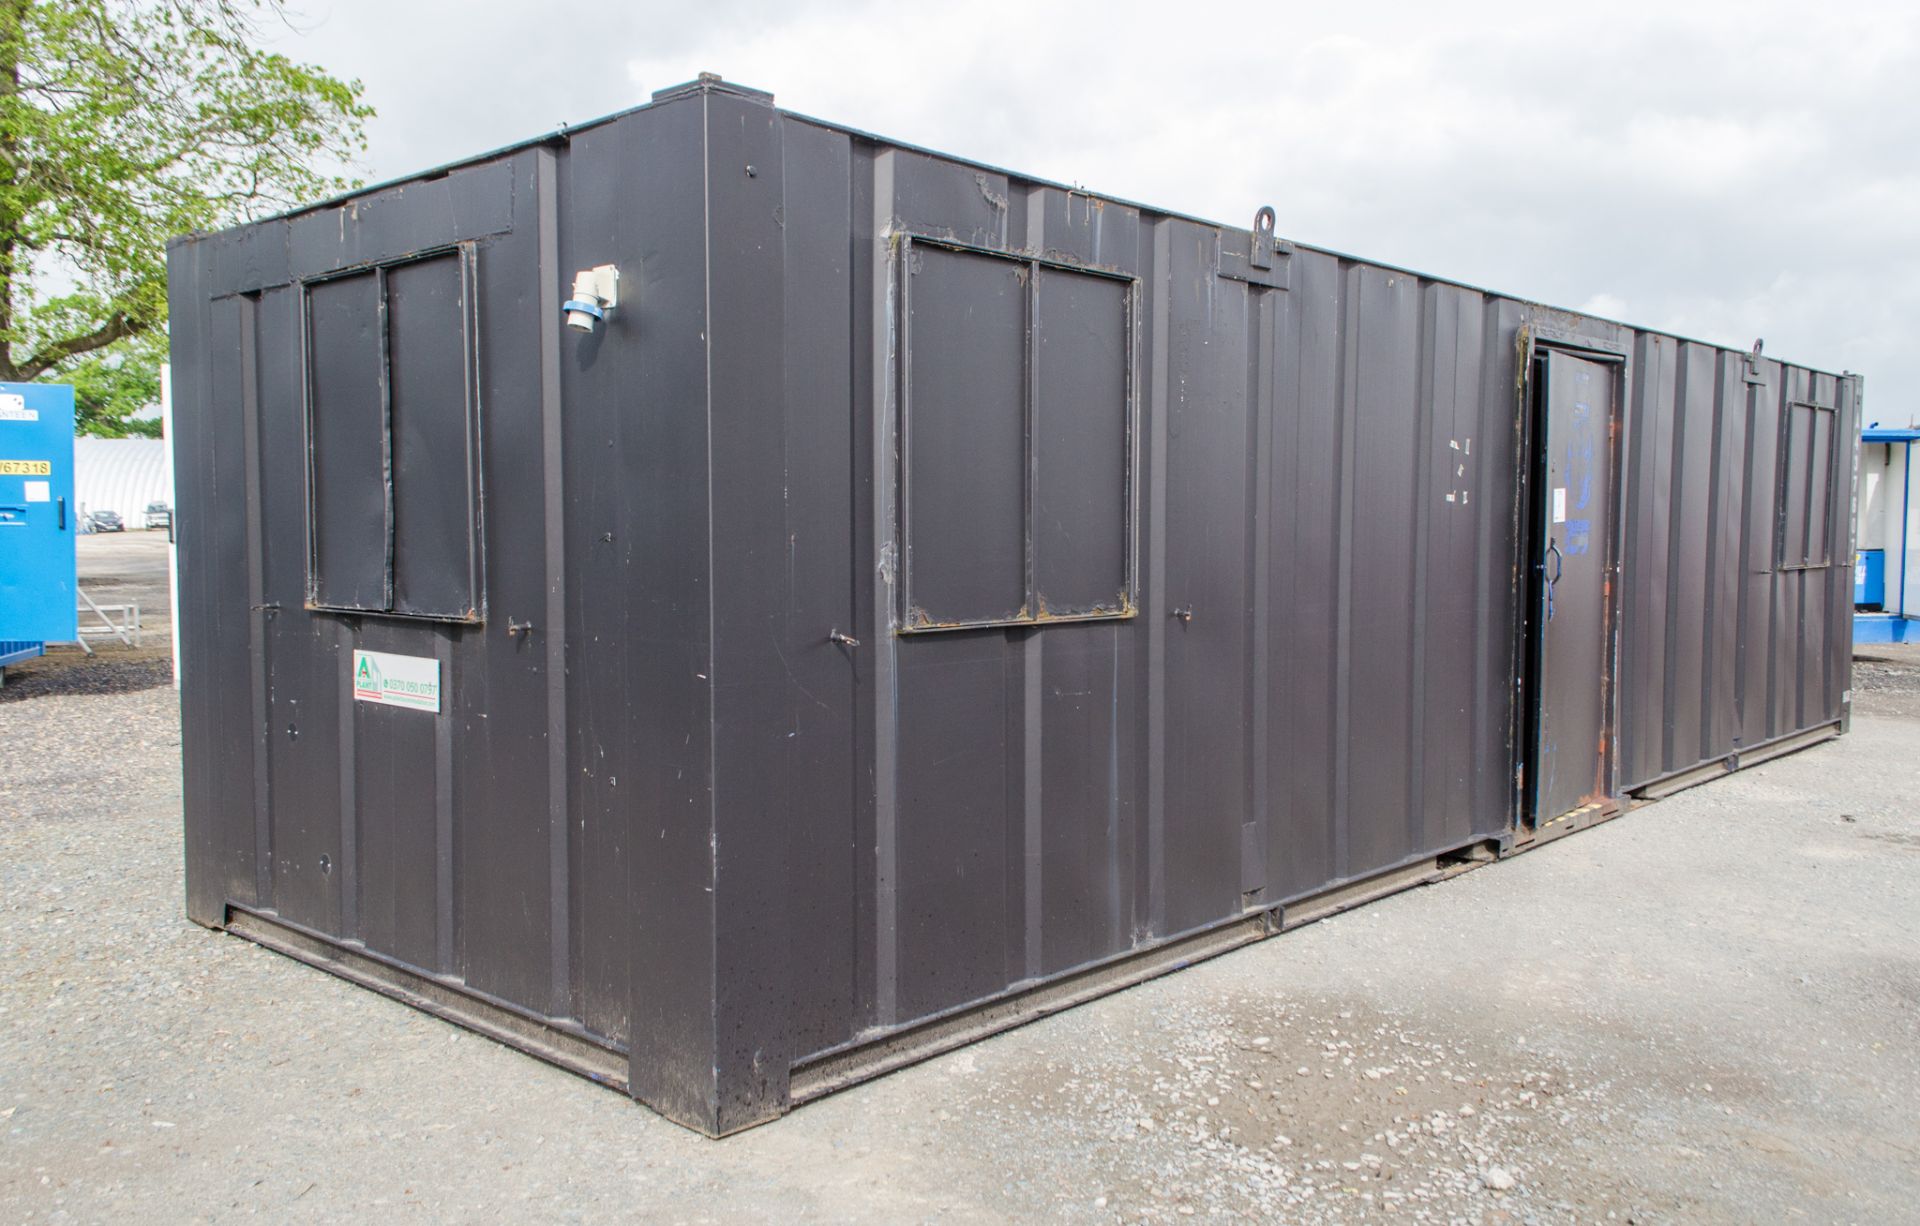 32 ft x 10 ft steel anti vandal office/changing area site unit A437607 ** No keys but open ** - Image 2 of 6